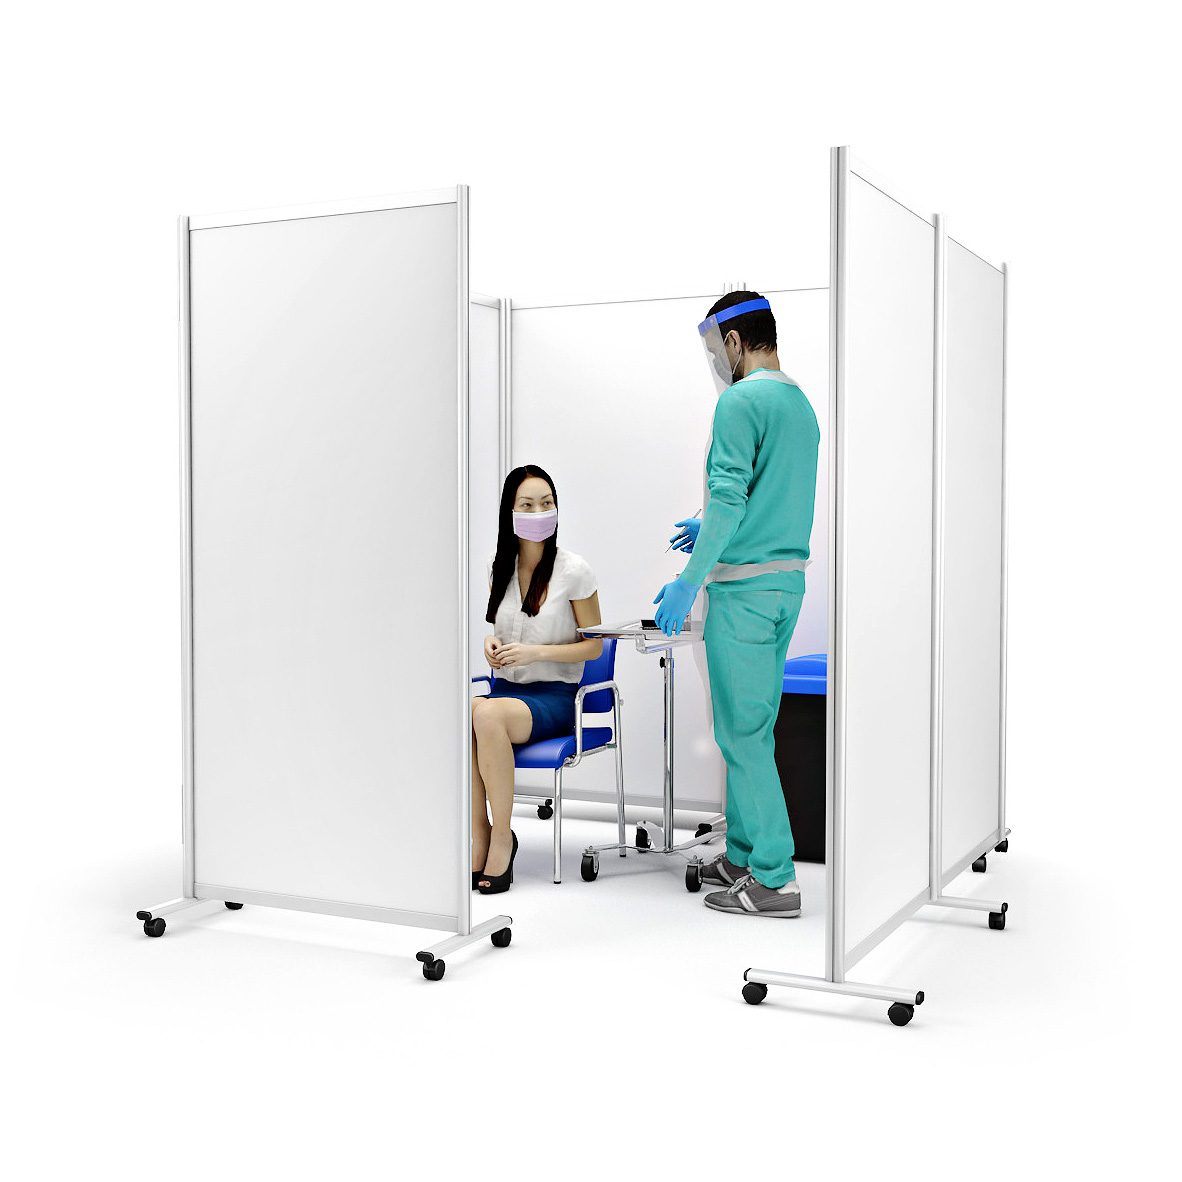 GUARDIAN DIGNITY® Medical Screens With Wheels Can Be Configured To Create A Portable Vaccine Booth